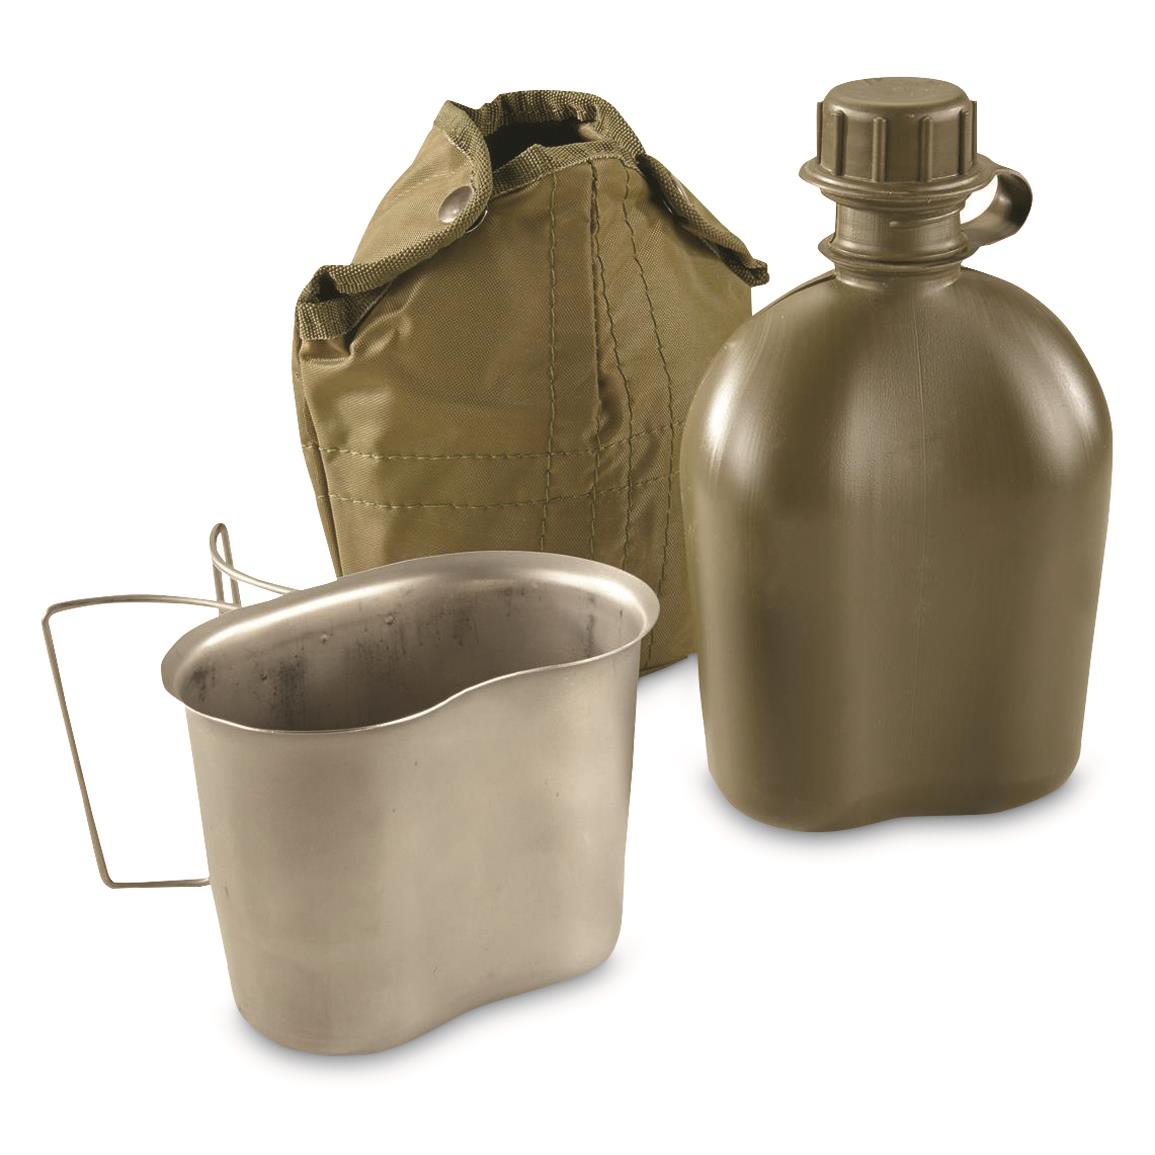 Austrian Military Surplus 1 Quart Canteen with Cover and Cup, New - 713207,  Canteens  Hydration at Sportsman's Guide